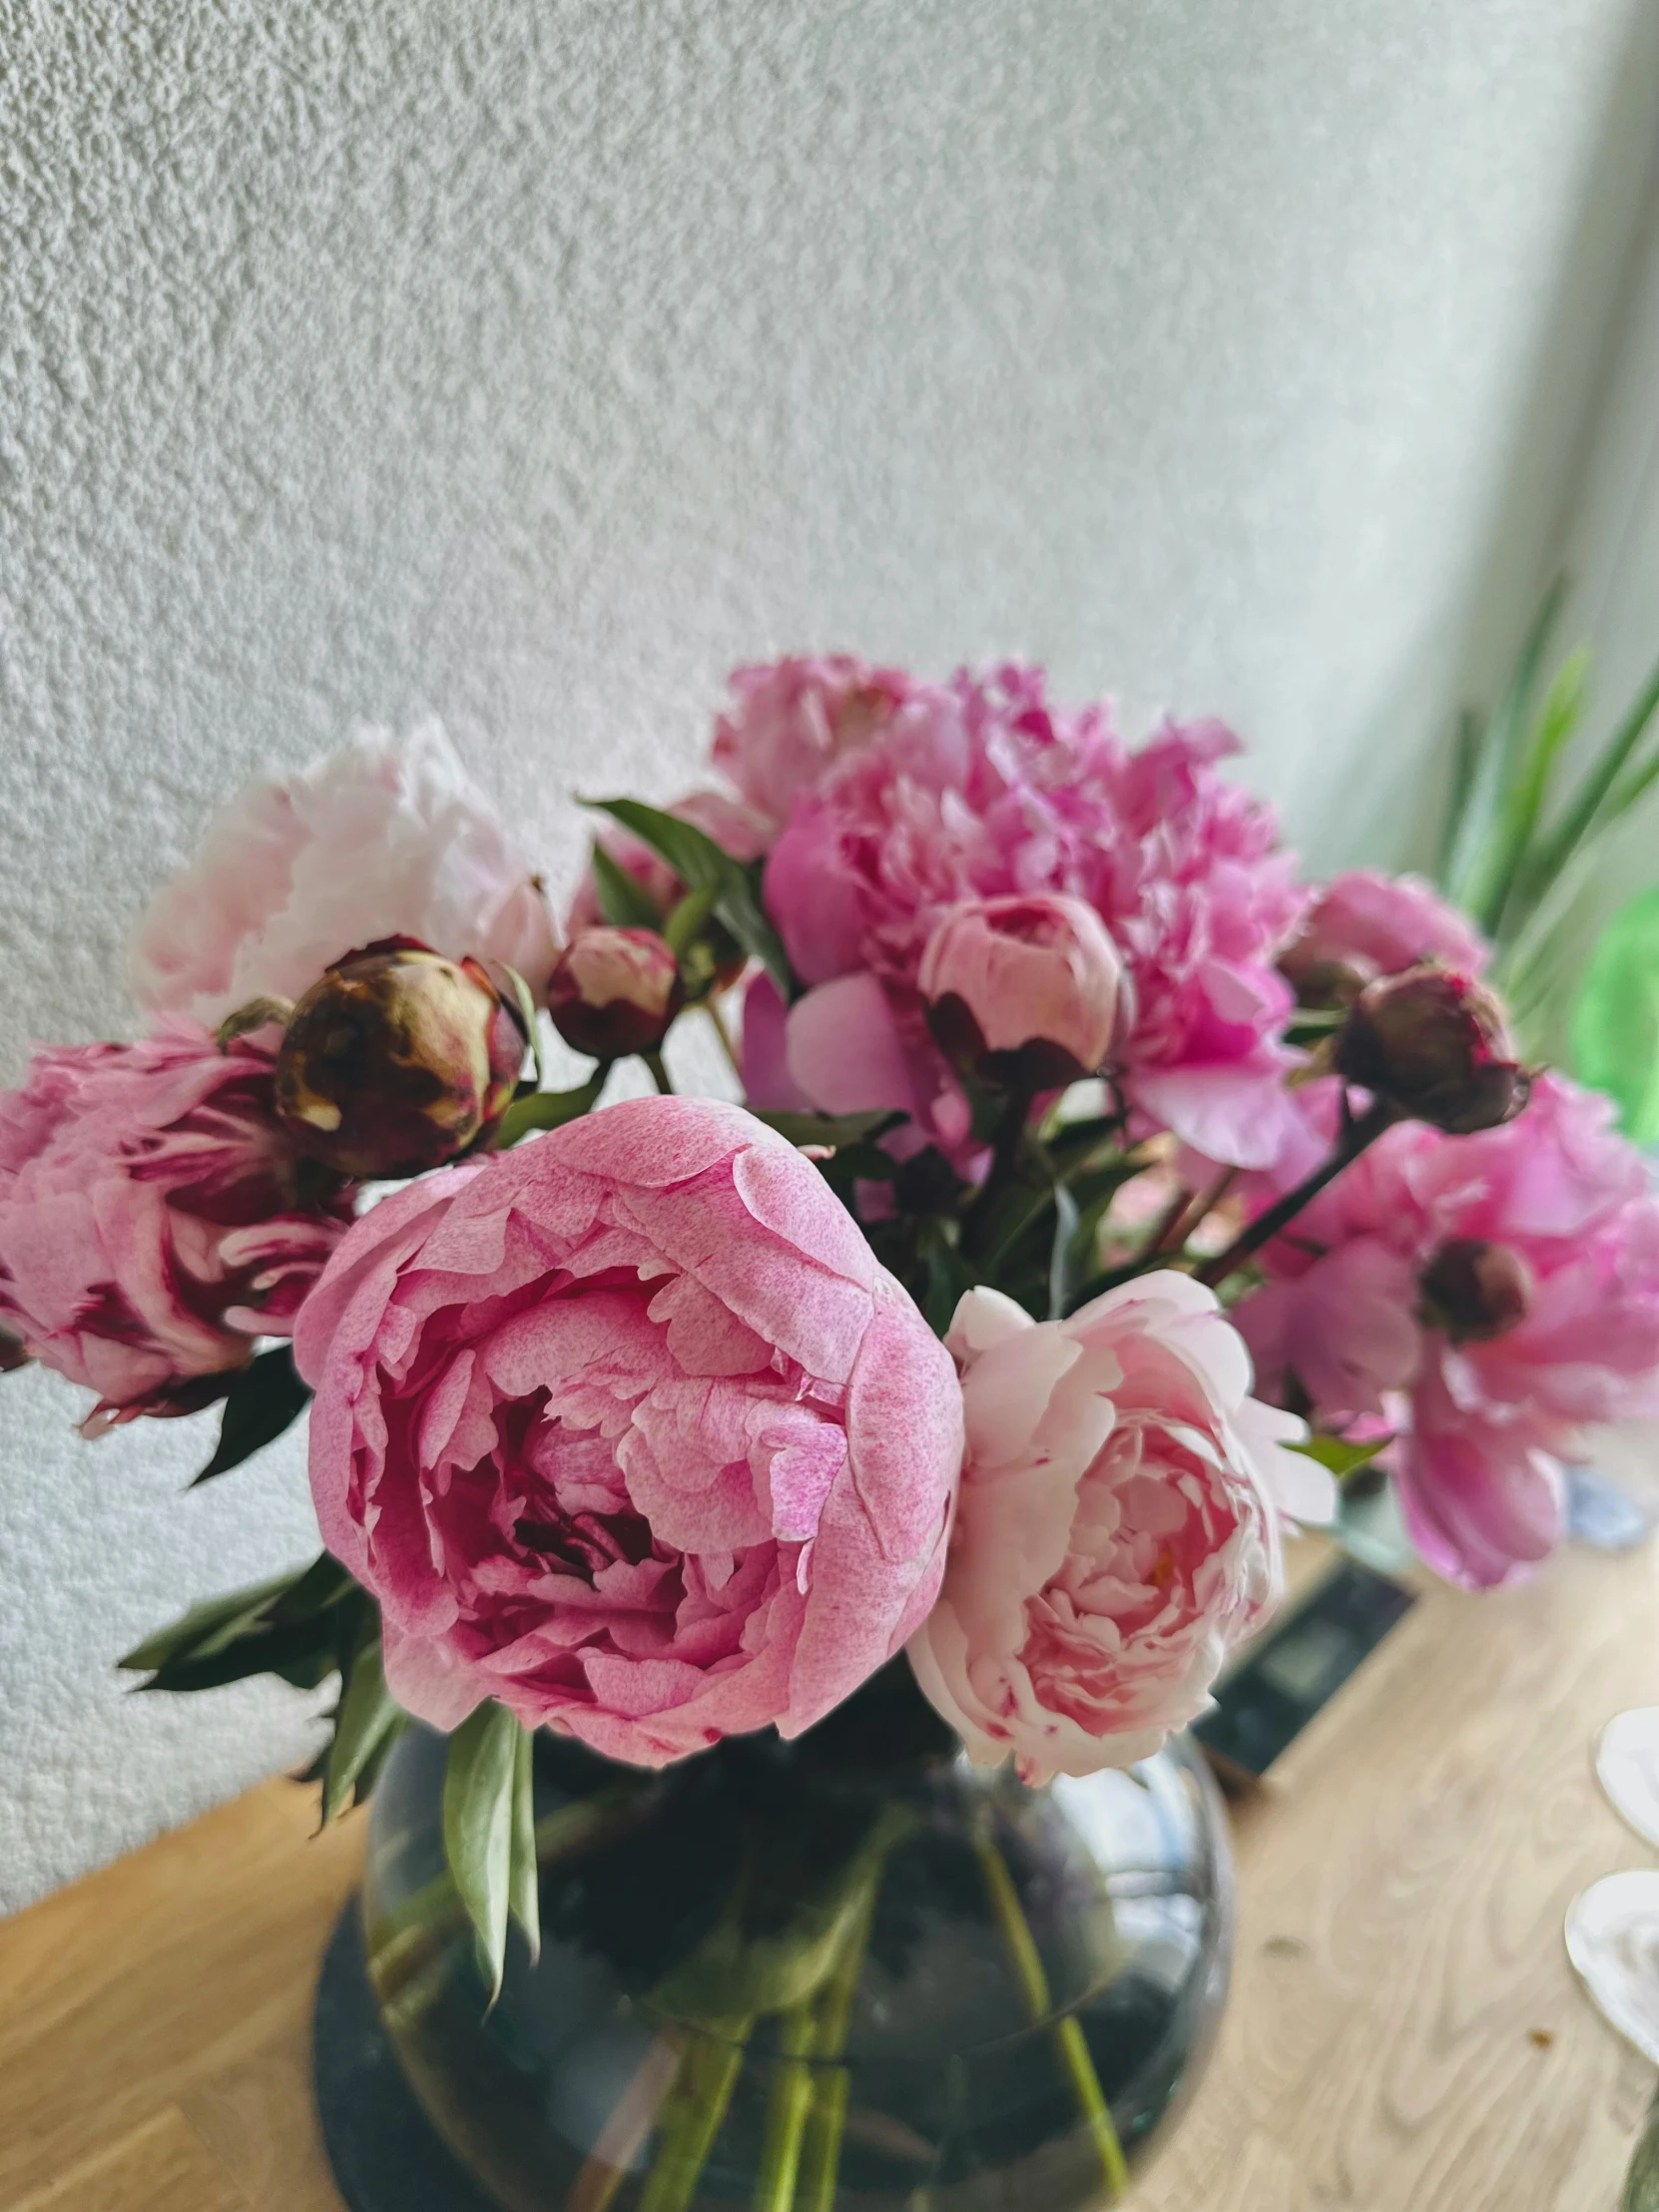 vases of pink flowers sitting on top of a wooden table